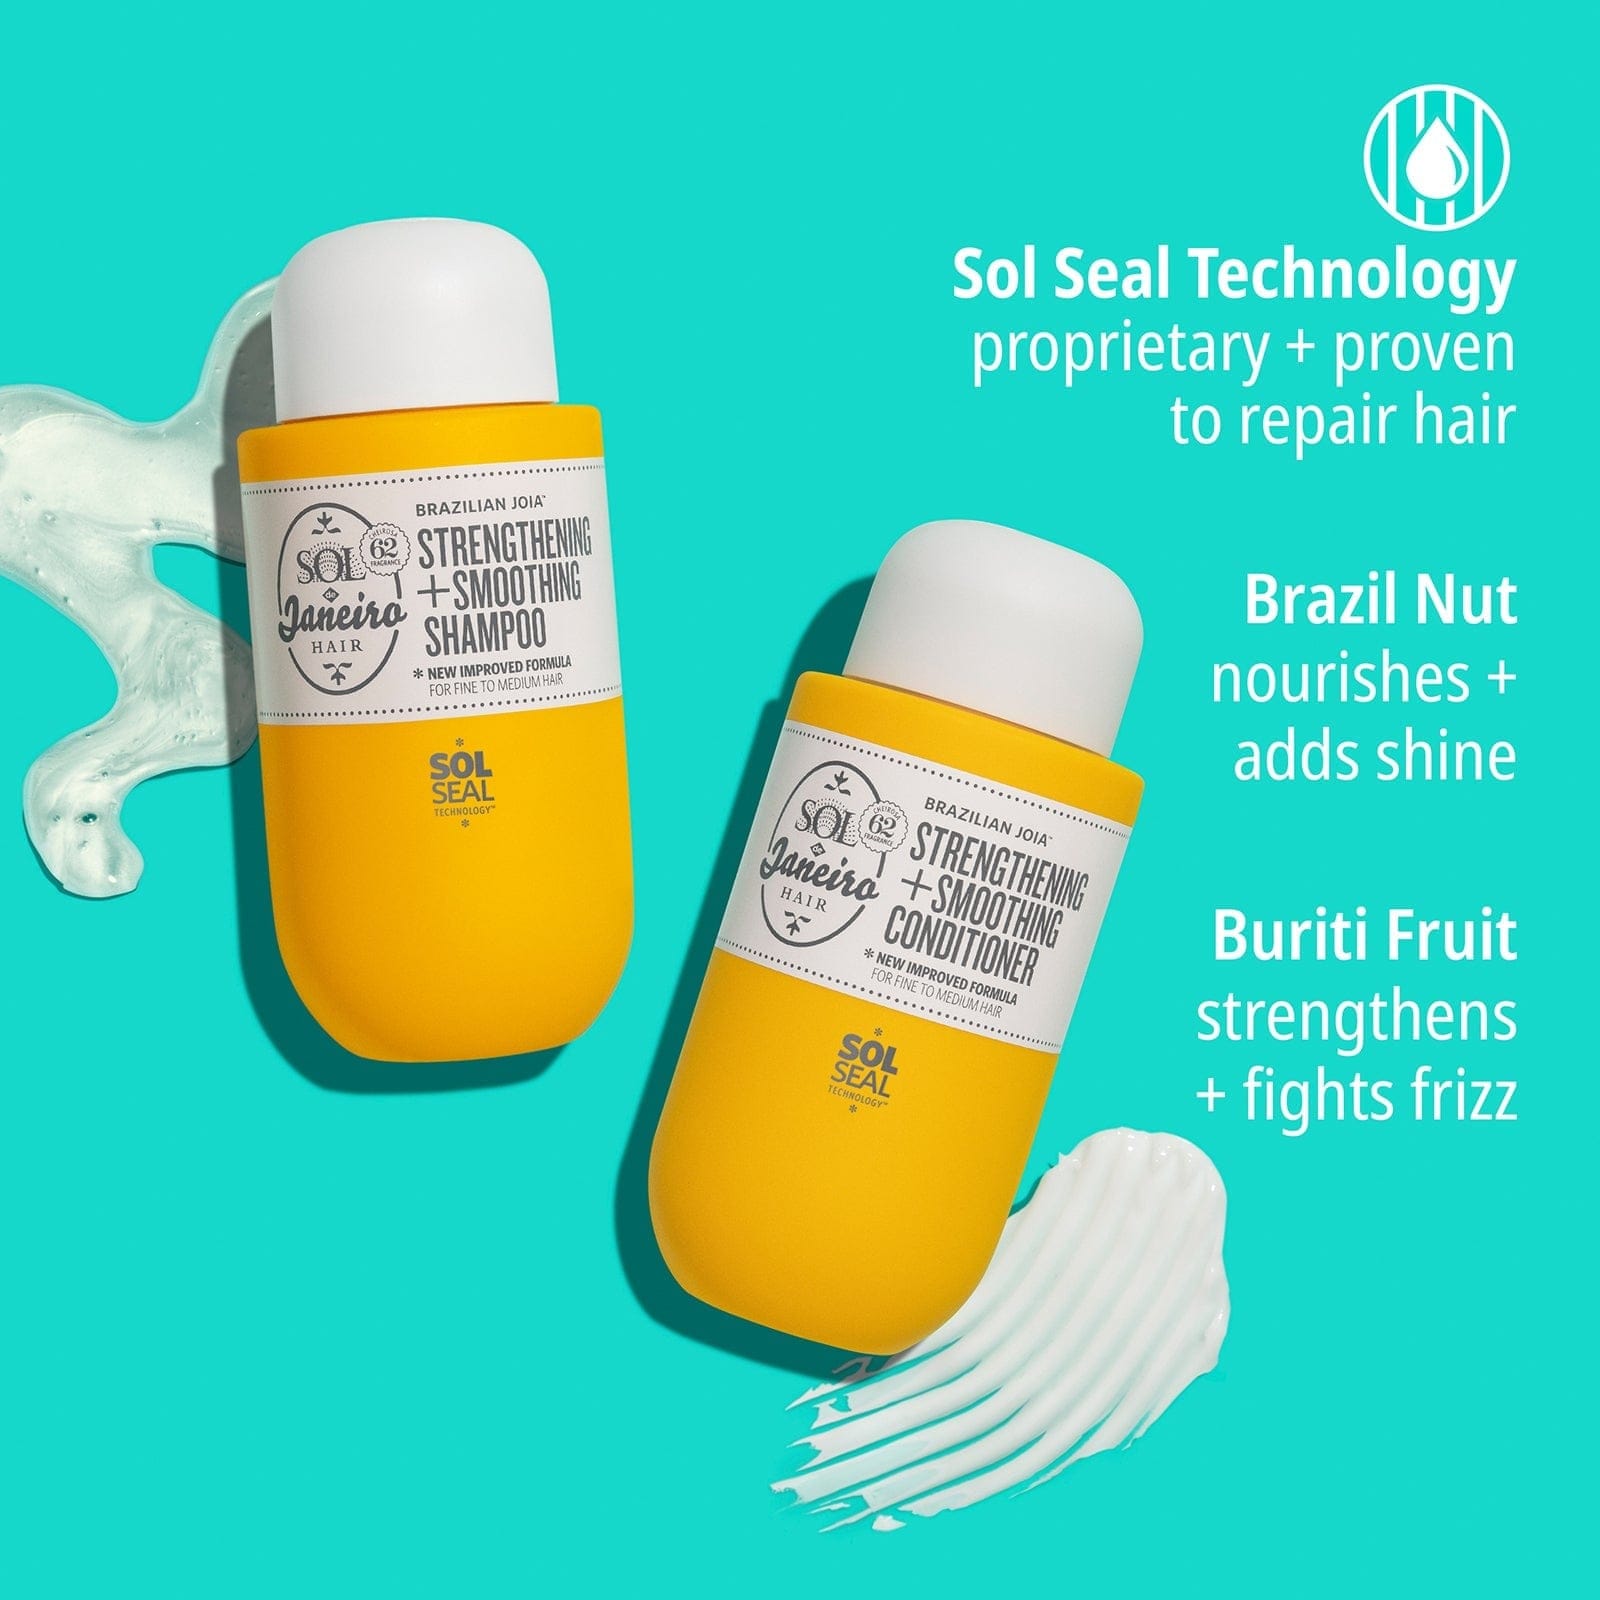 Sol seal technology proprietary + proven to repair hair - brazil nut nourishes + adds shine, buriti fruit strengthens + fights frizz